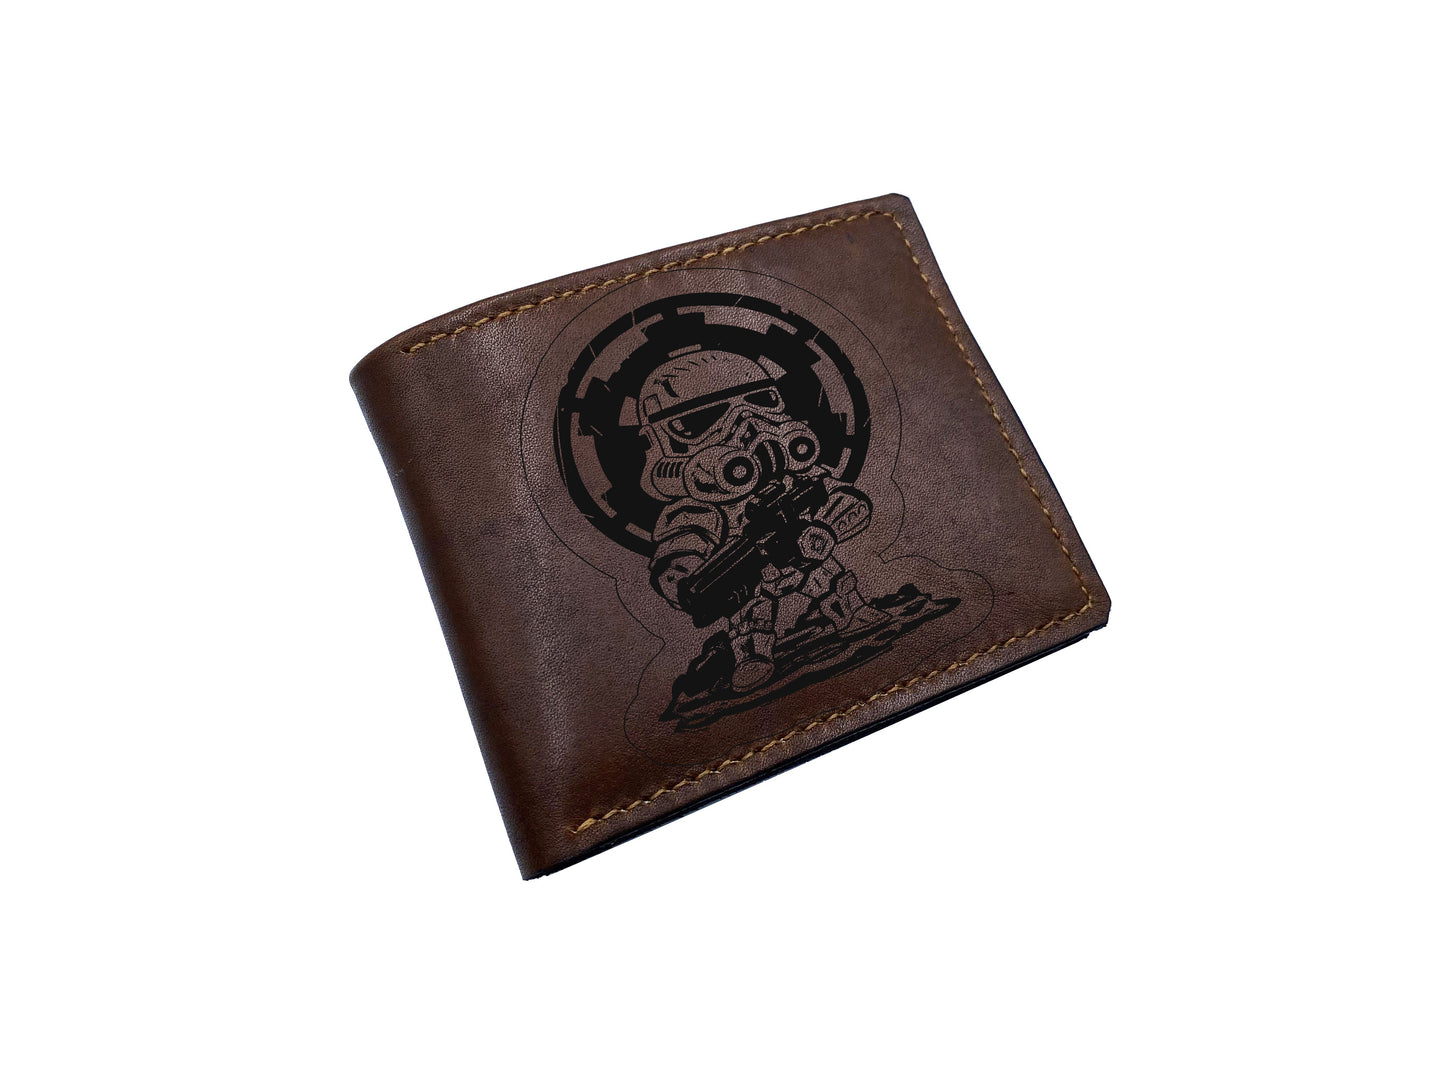 Custom leather gift for him, wallet for dad, cool leather present for boyfriend, starwars movie characters wallet